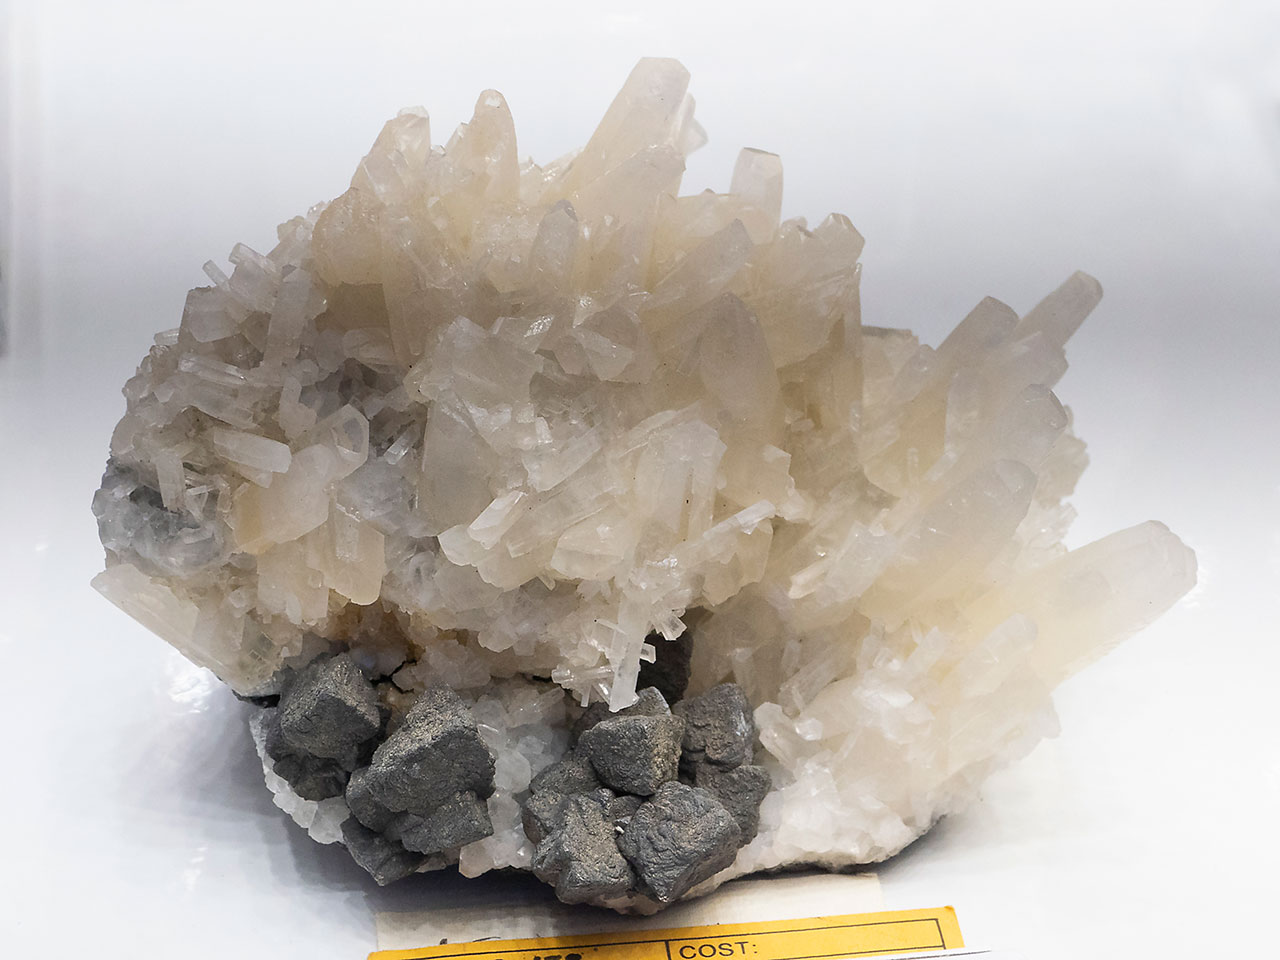 Rare native antimony crystals with aragonite from Lake George, New Brunswick, Canada